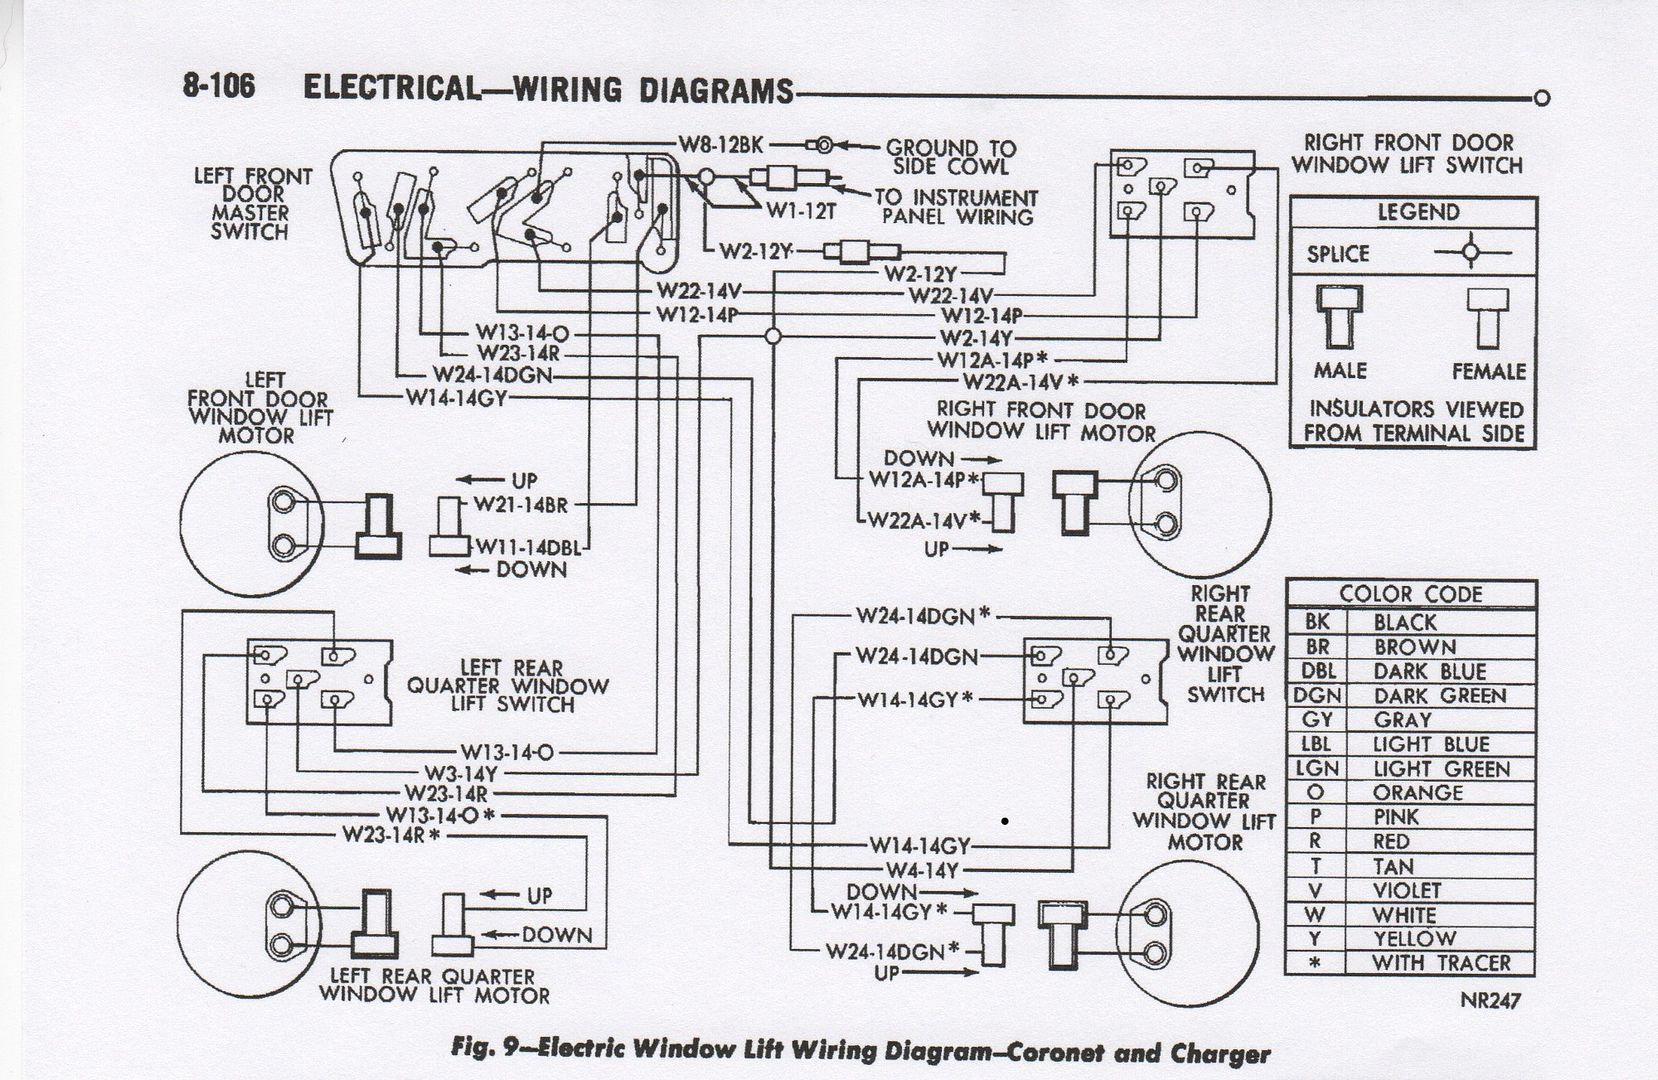 Vintage Power Window Systems? - Page 3